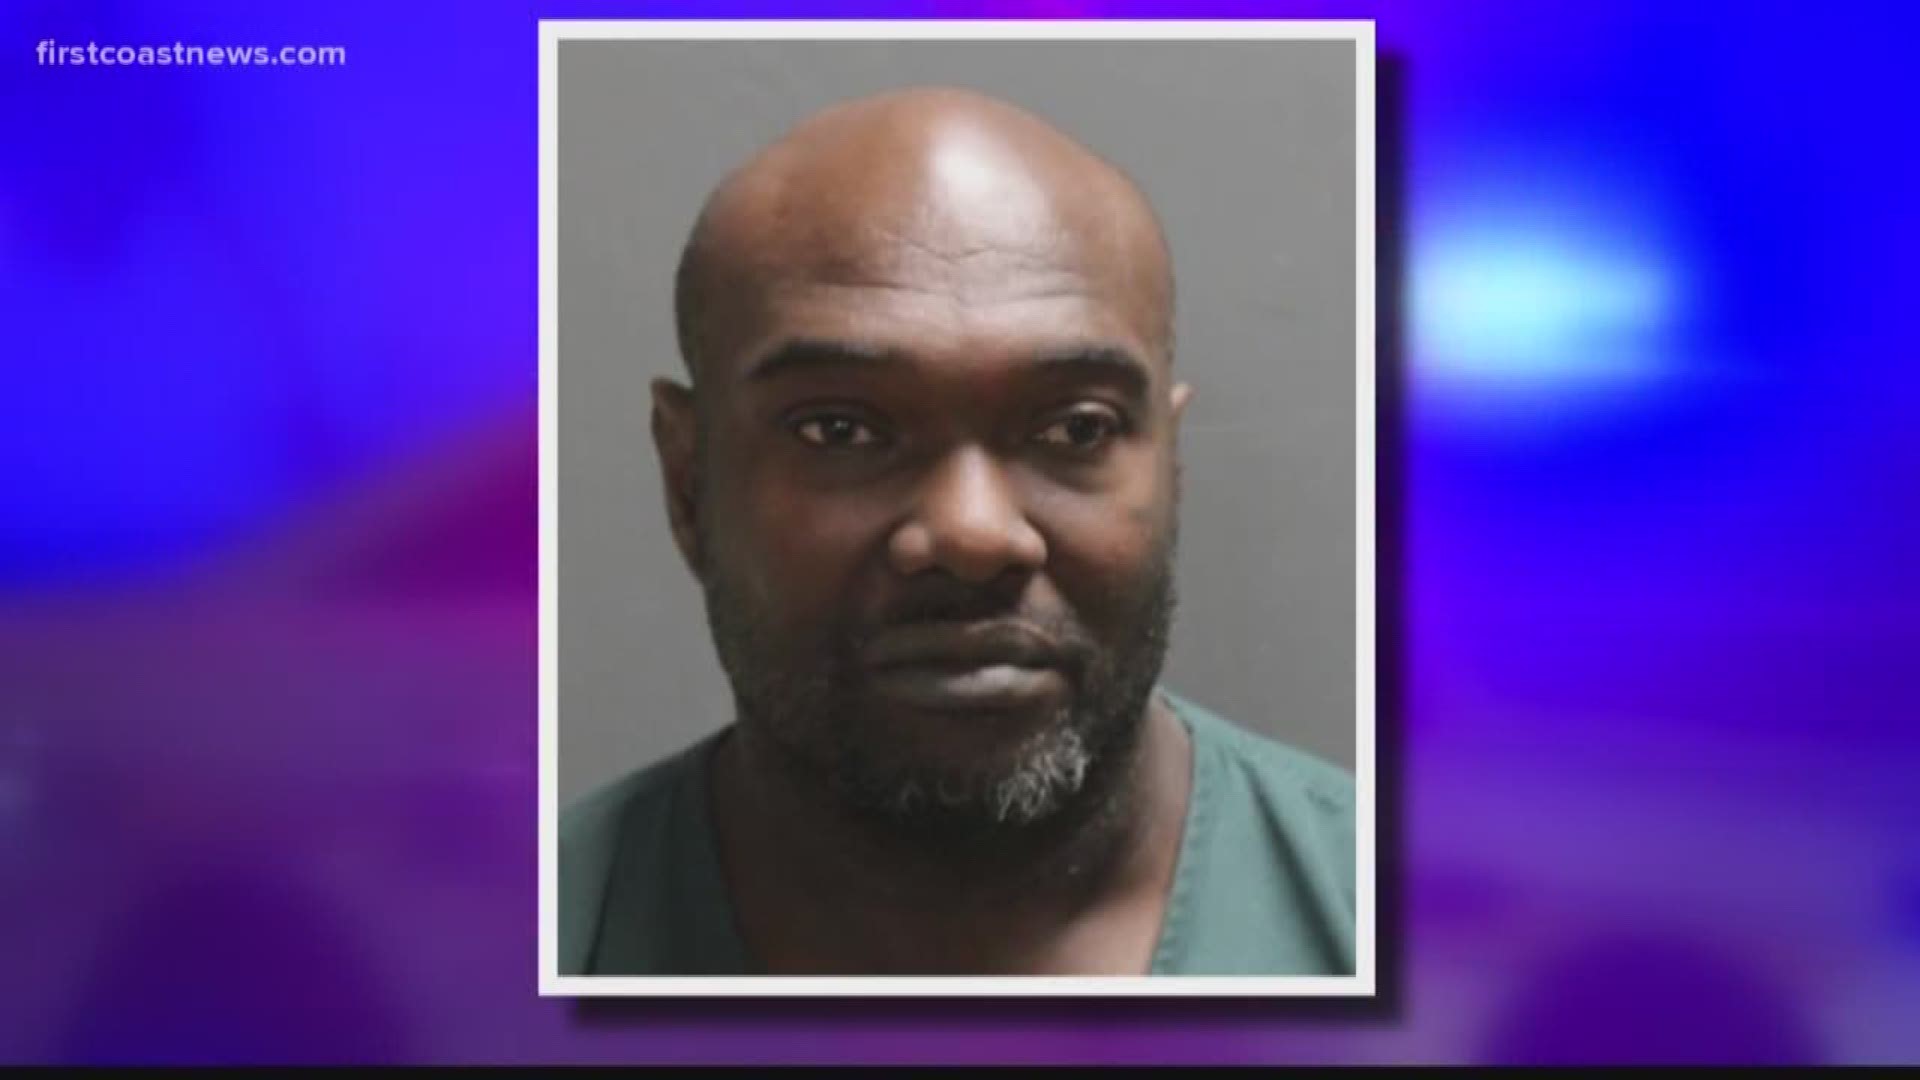 Police arrested a man accused of stabbing another man in the head in Downtown Jacksonville.